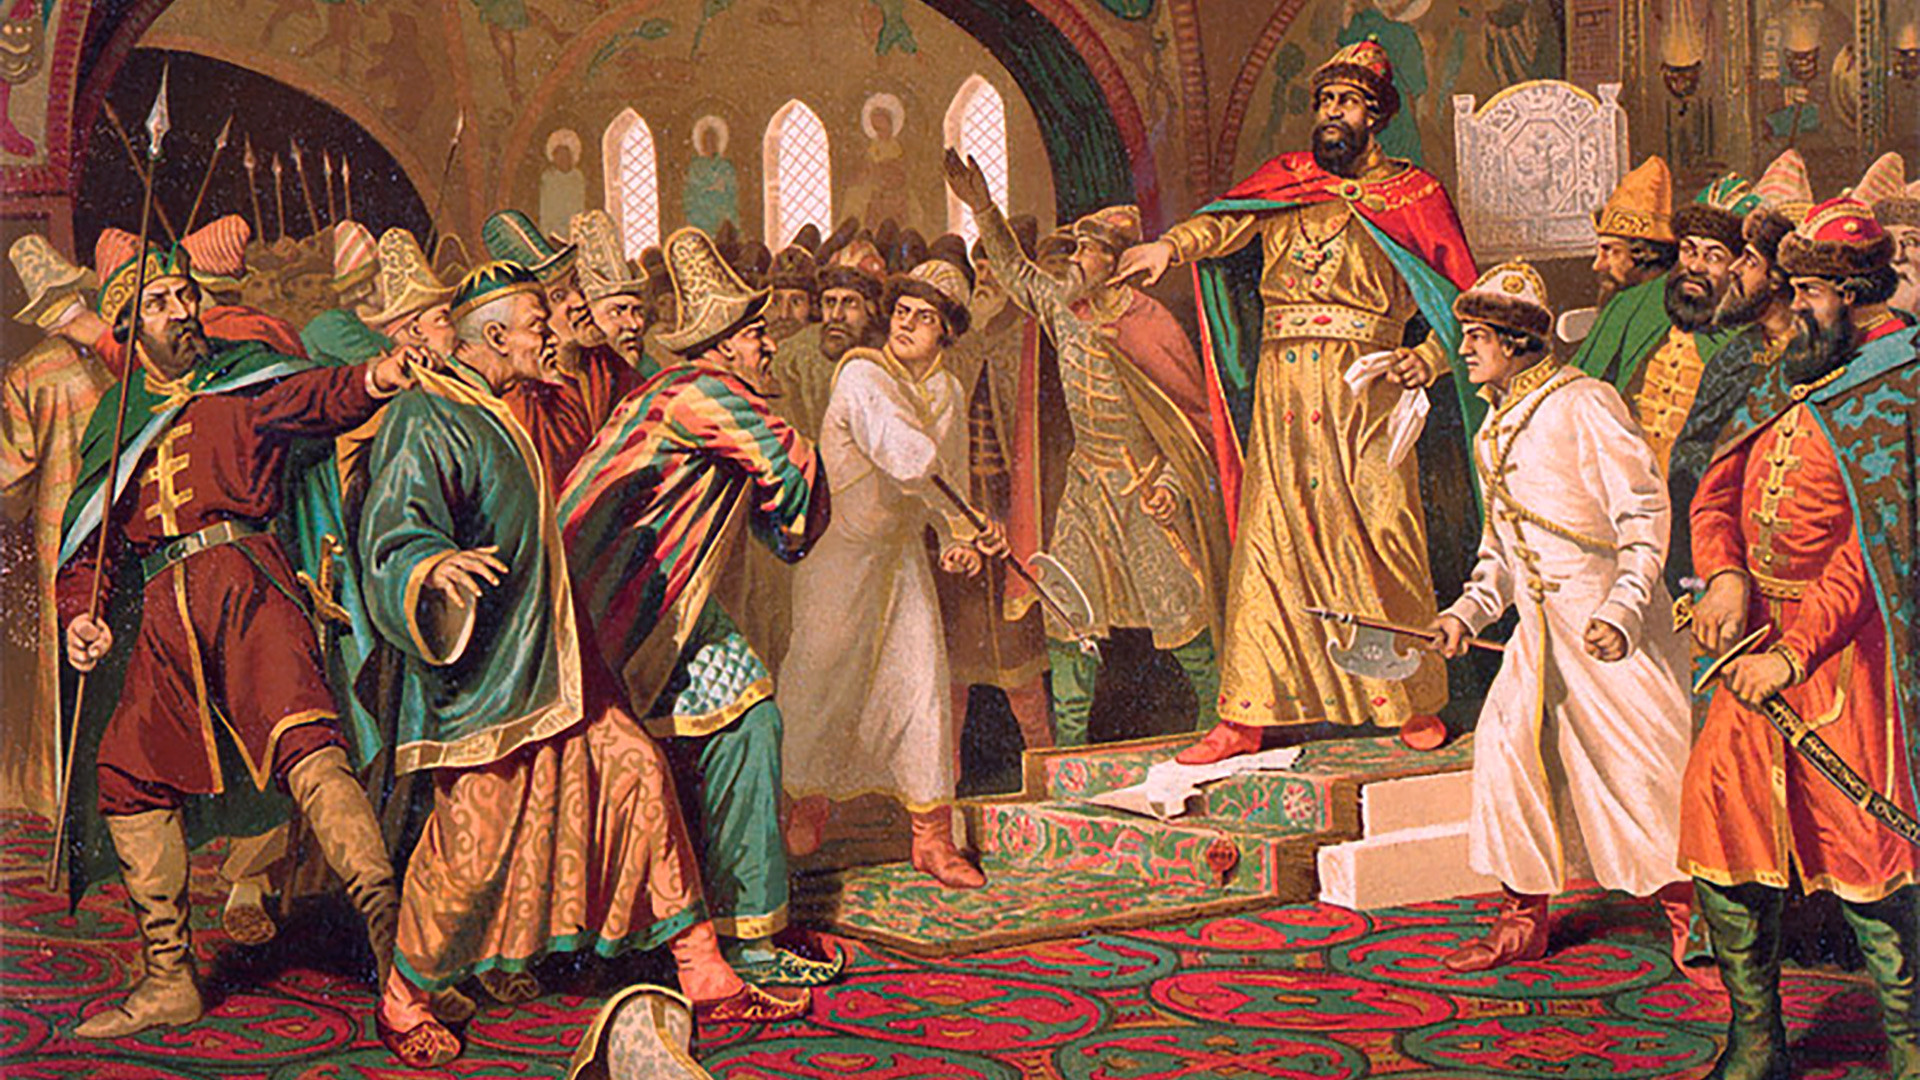 Ivan III tearing the khan's letter to pieces by Aleksey Kivshenko. According to the legend, Ivan tore apart the letter from Akhmat in which he asked for the tribute